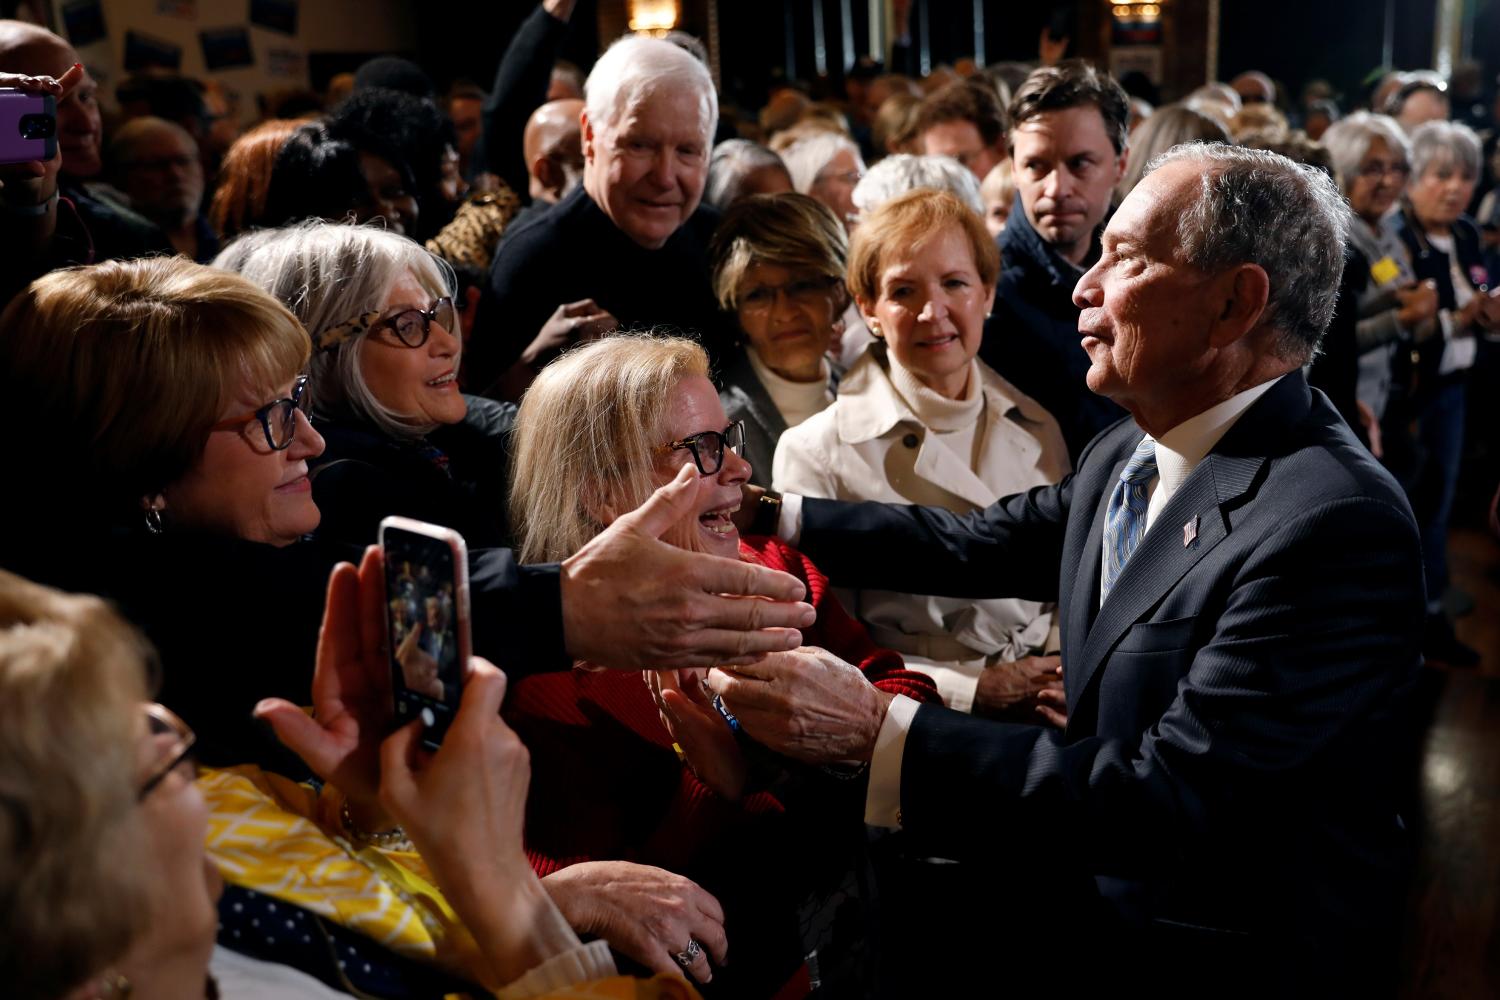 Democratic presidential candidate Michael Bloomberg shakes hands with supporters following a campaign event at the Bessie Smith Cultural Center in Chattanooga, Tennessee, U.S. February 12, 2020.  REUTERS/Doug Strickland